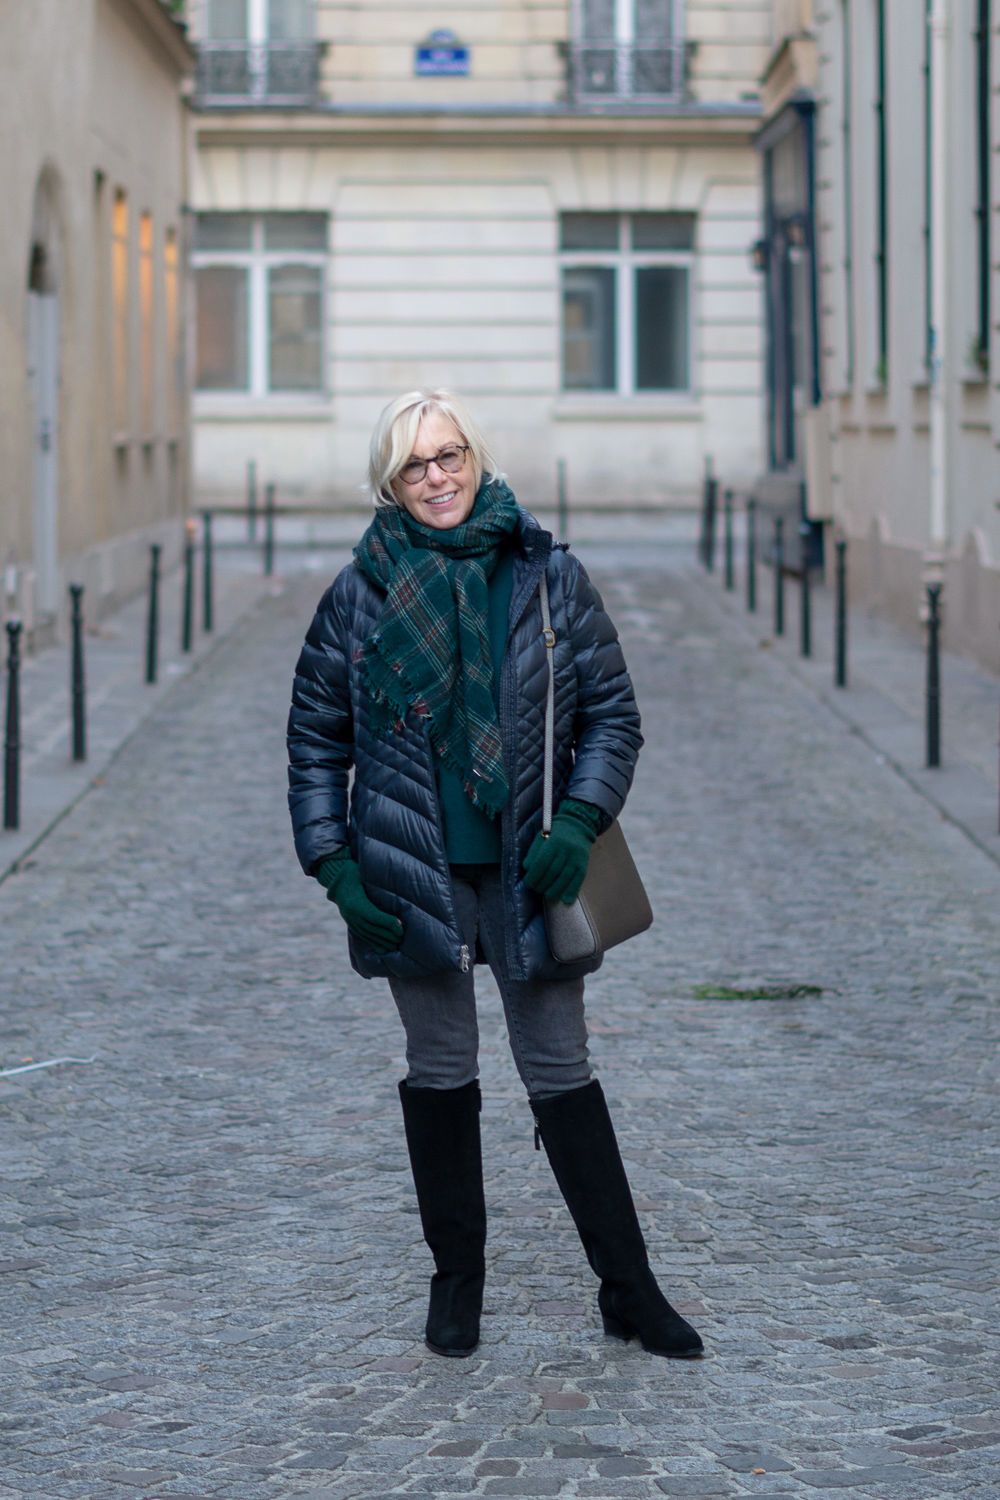 Winter travel outfit with green and navy. Details at une femme d'un certain age.